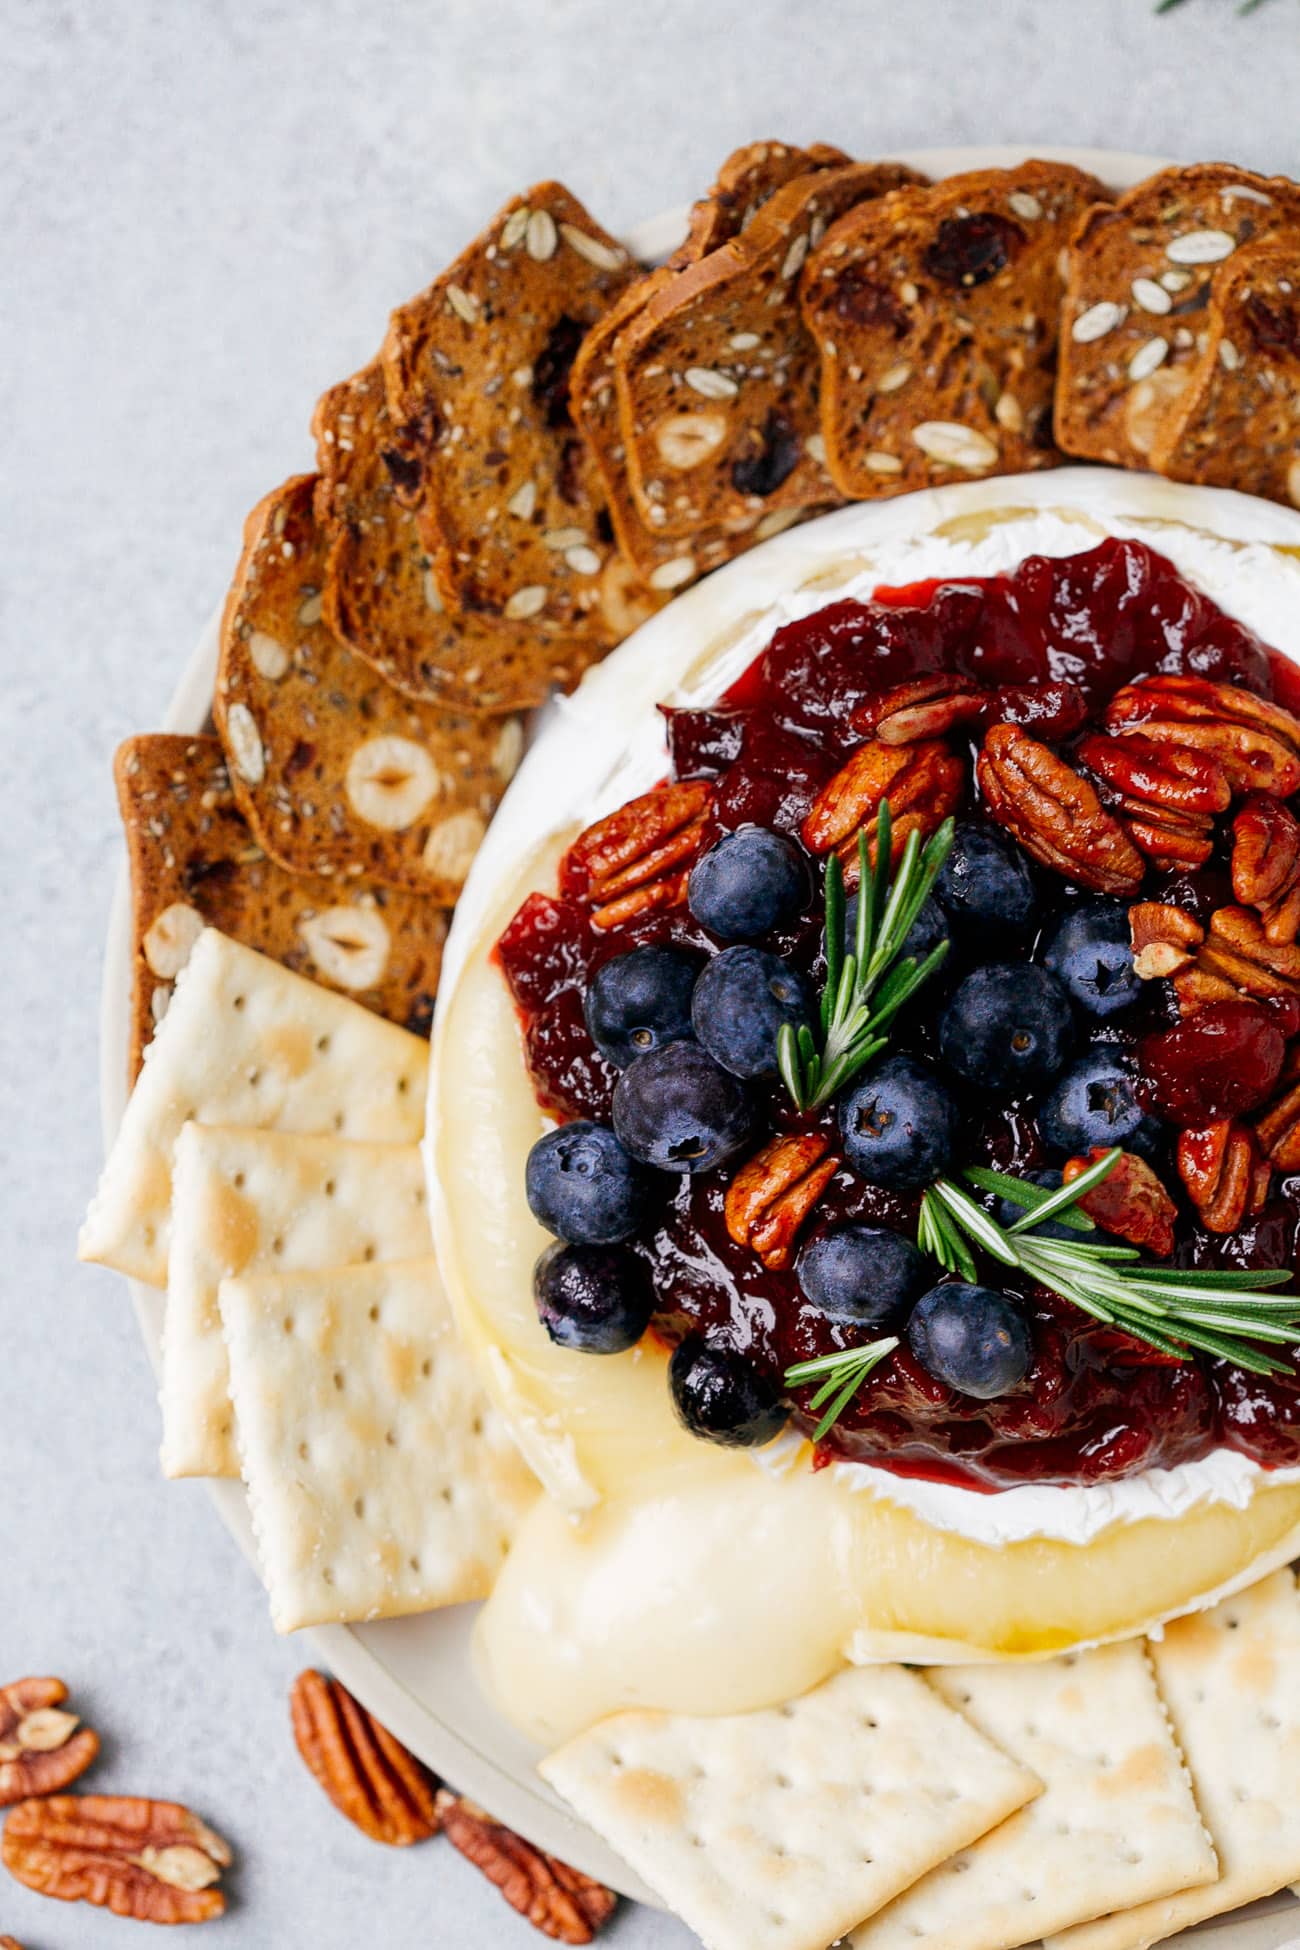 Overhead view of a baked brie with cranberry sauce with pecans, blueberries, and rosemary on top.